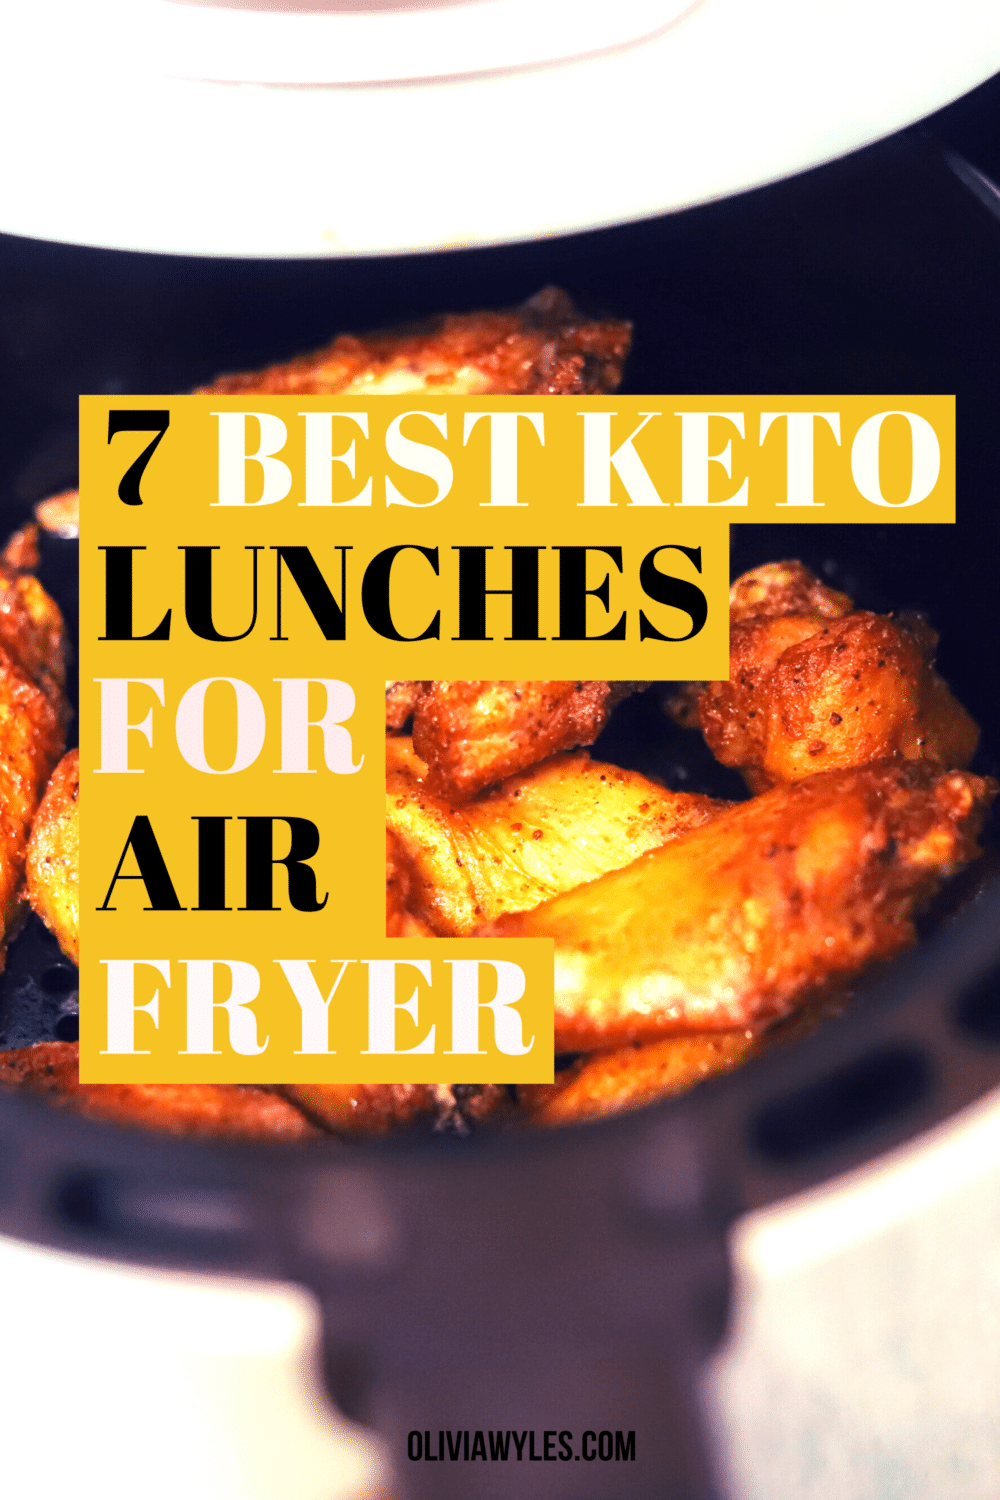 7 Best Keto Air Fryer Lunches